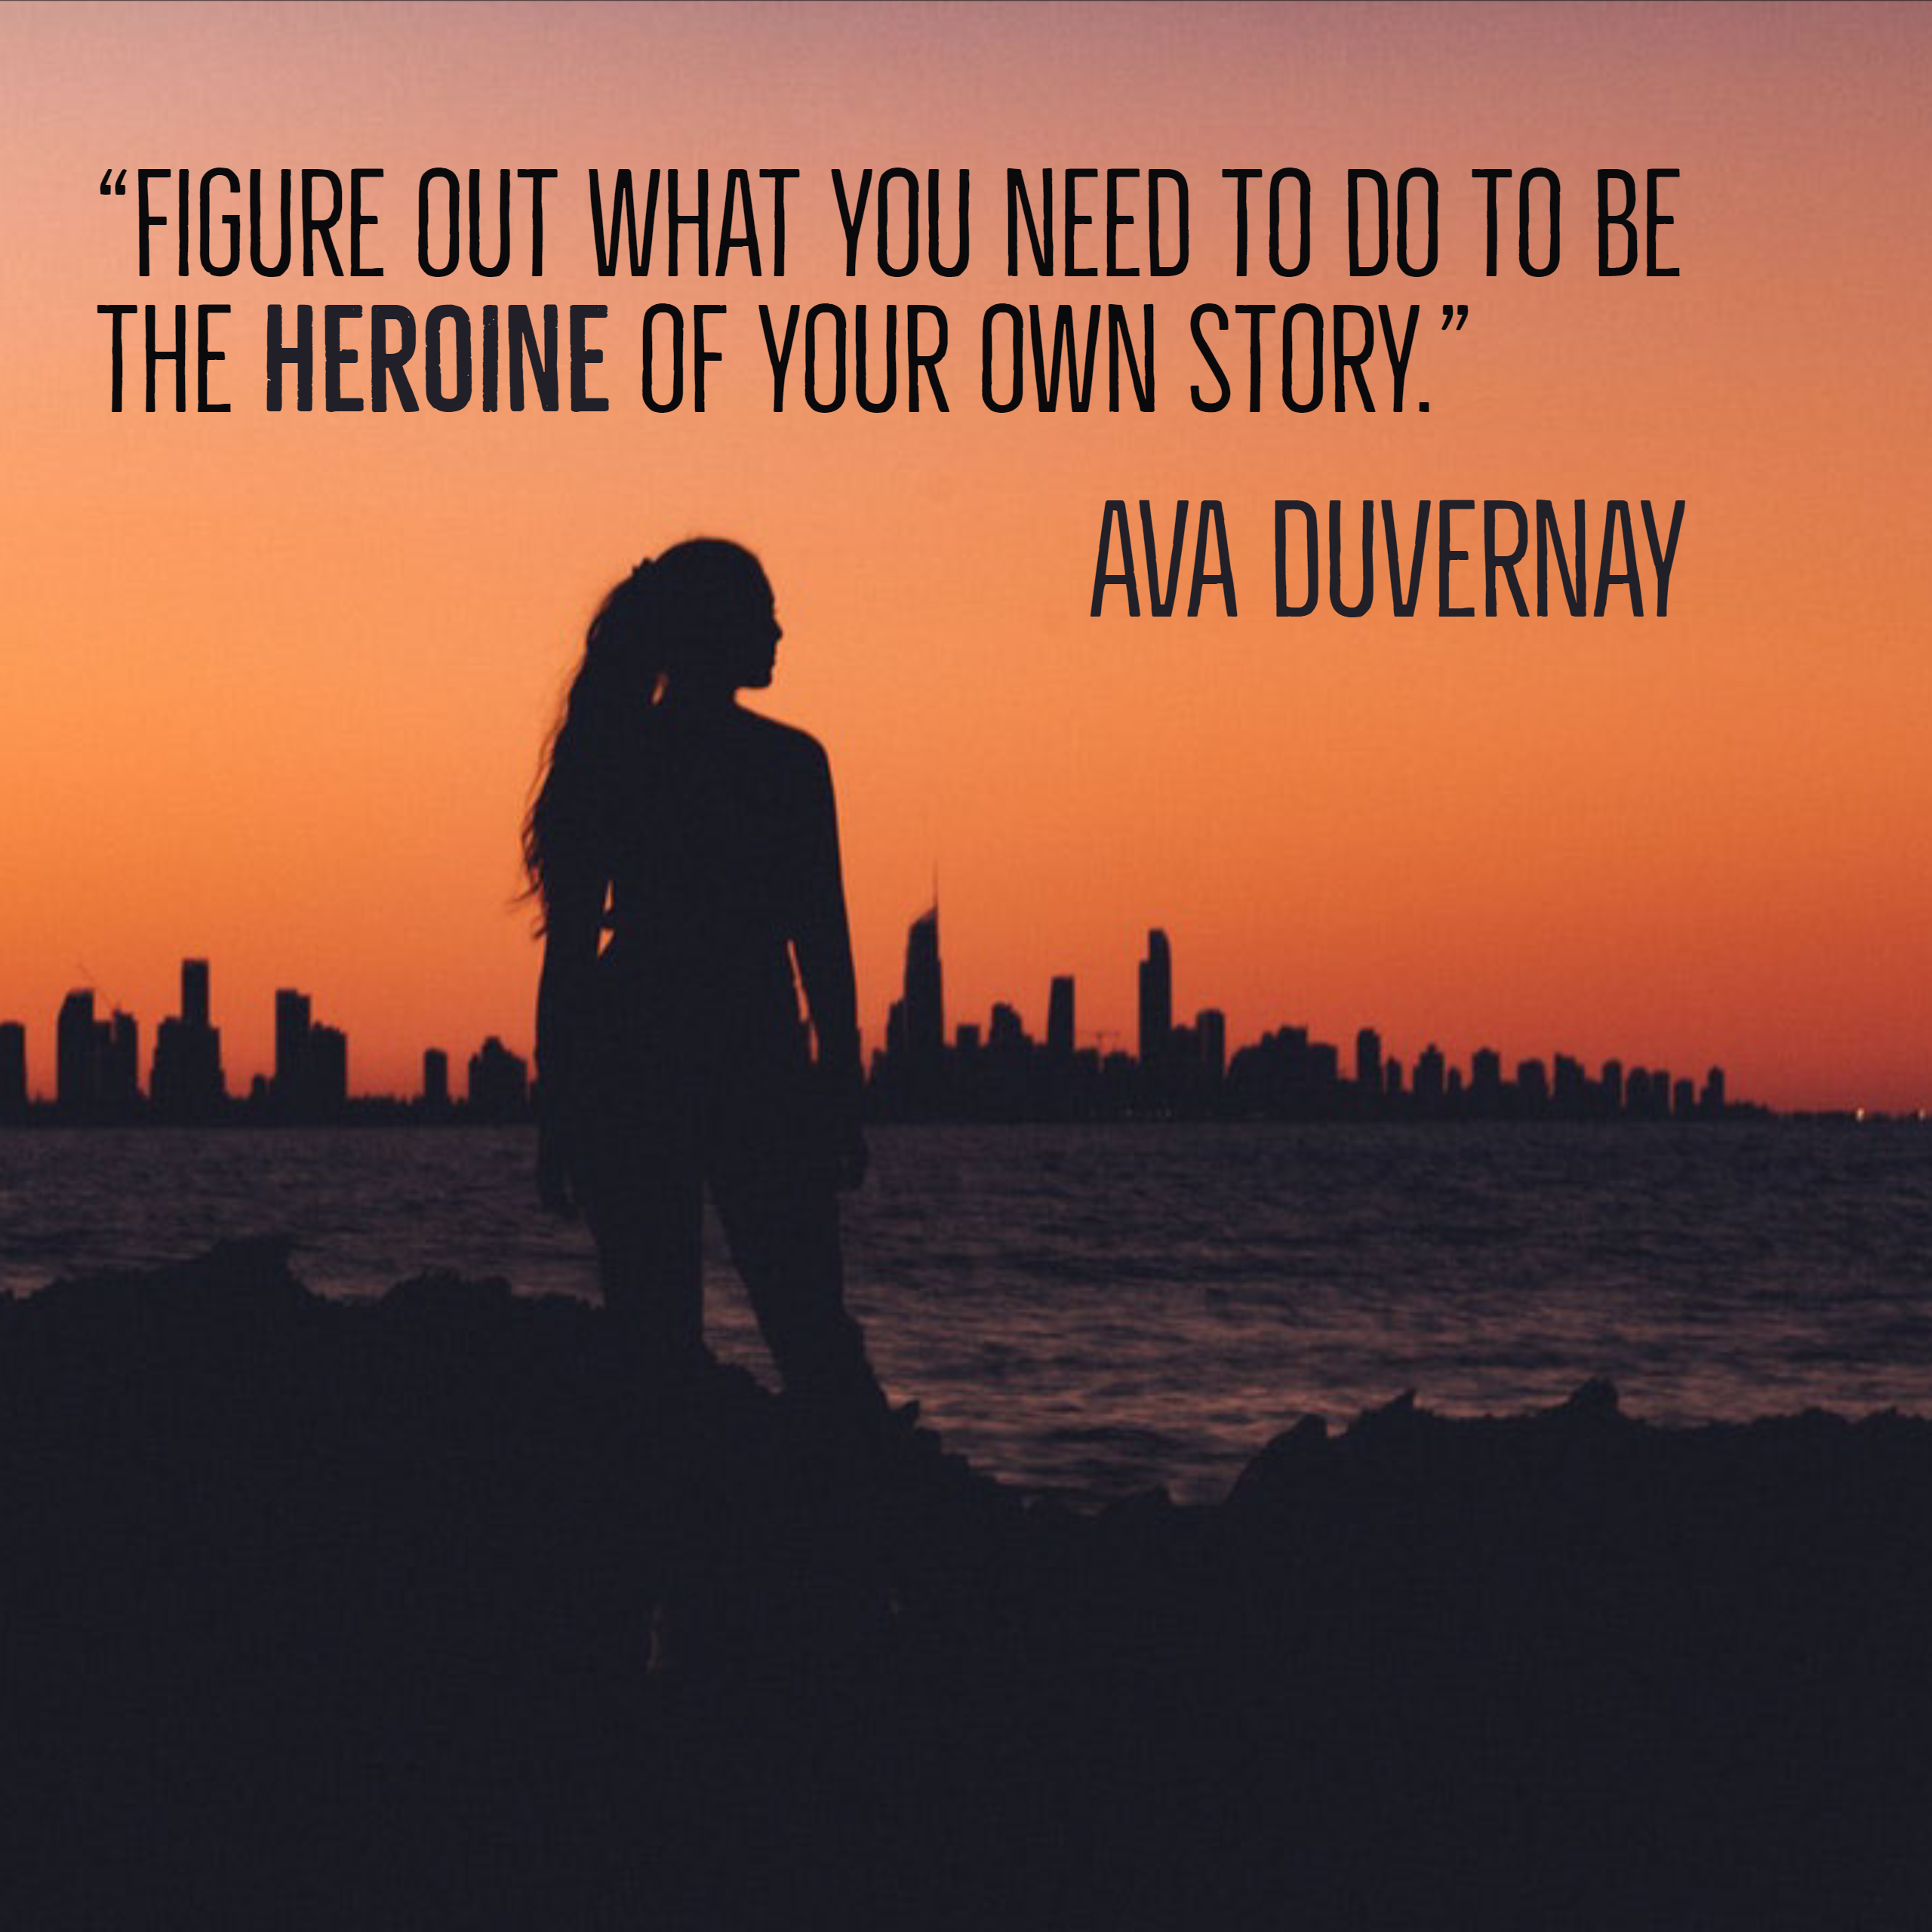 Figure out what you need to do to be the heroine of your own story.